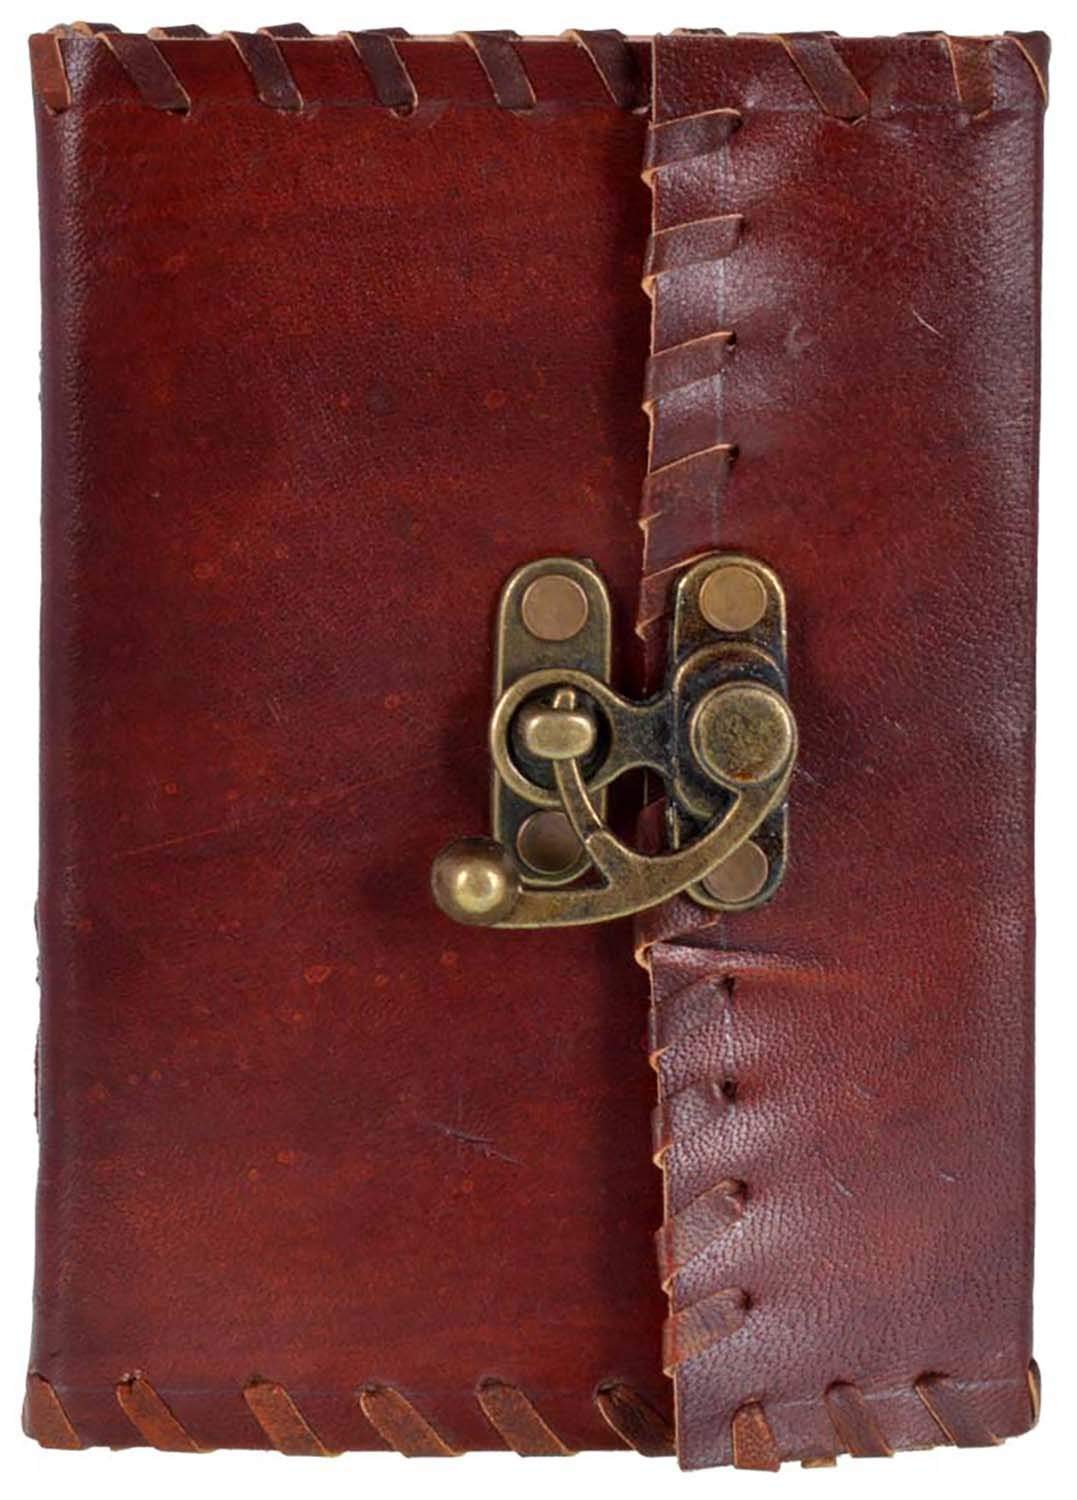 Handmade Leather Journal Diaries Classic Lock Design Cover, 100% Cotton handmade Paper Writing Leather Journal for Office